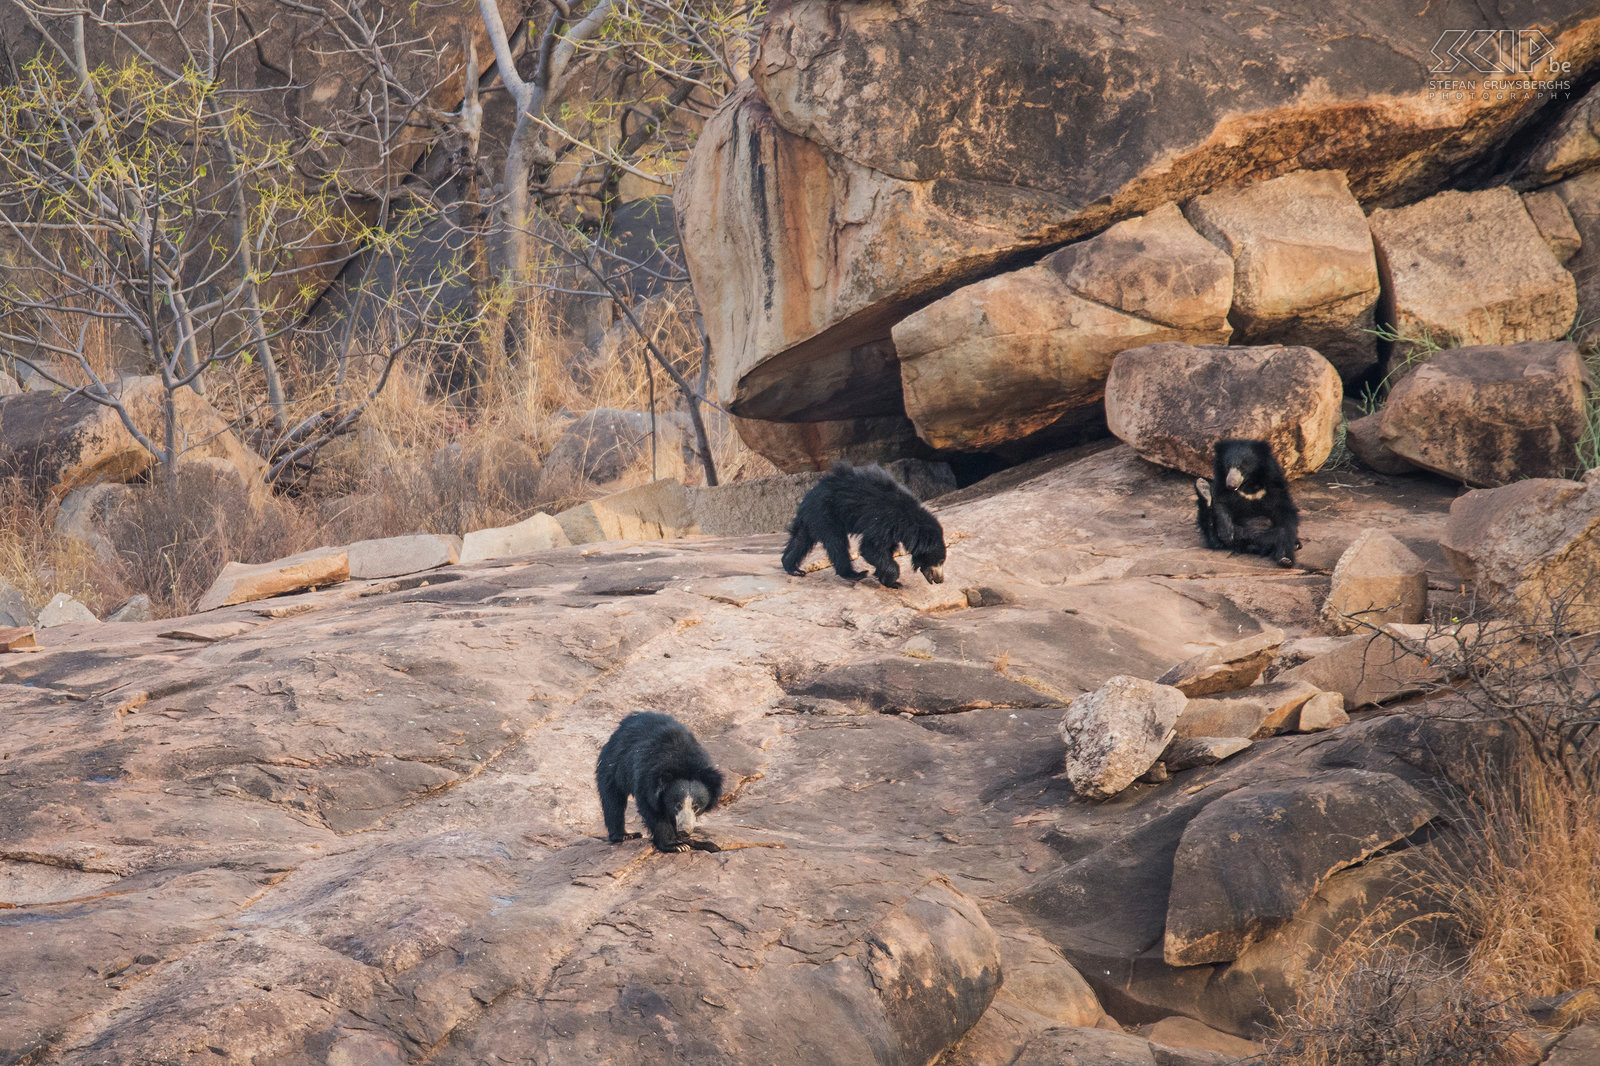 Daroji - Sloth bears A sloth bear (Melursus ursinus) is a nocturnal animal that is quite shy and nervous. They feed on termites, bee colonies and fruits. We went to the Daroji Bear Sanctuary near Hampi. From an observation tower on a hill you have an excellent view of the hills and rock formations of this nature reserve. We were lucky because in the late afternoon we saw a female sloth bear with two cubs running around and afterwards we also spotted a male sloth bear.  There also live a lot of Indian peafowls in the park. Stefan Cruysberghs